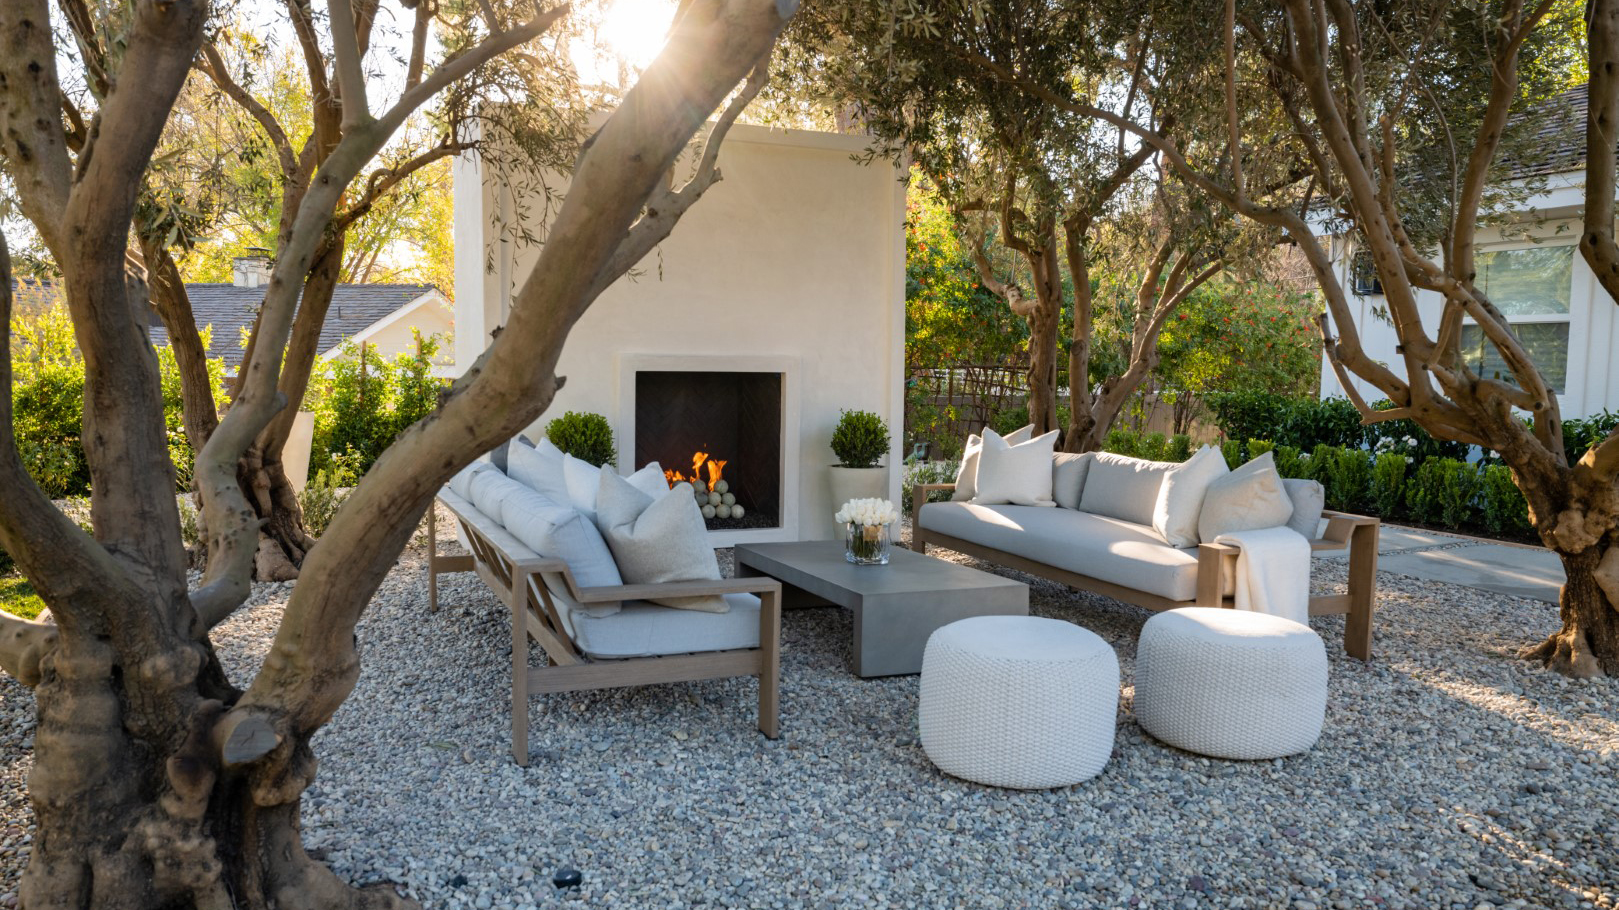 The backyard after renovations by Drew and Jonathan Scott with Kris Jenner and Kim Kardashian, as seen on Celebrity IOU.